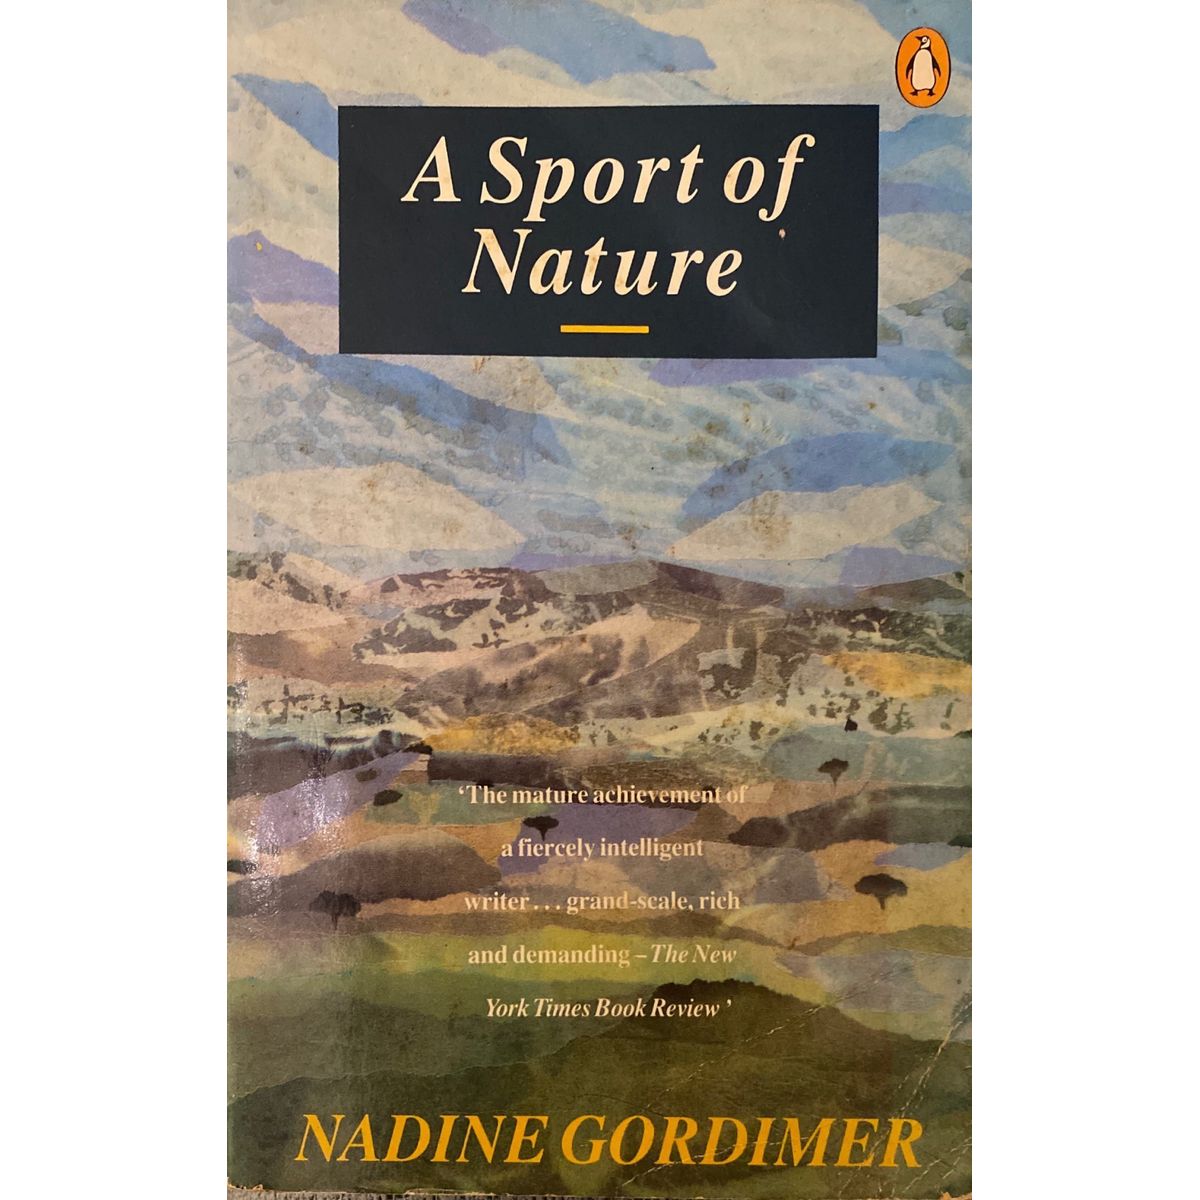 ISBN: 9780140103298 / 0140103295 - A Sport of Nature by Nadine Gordimer [1988]